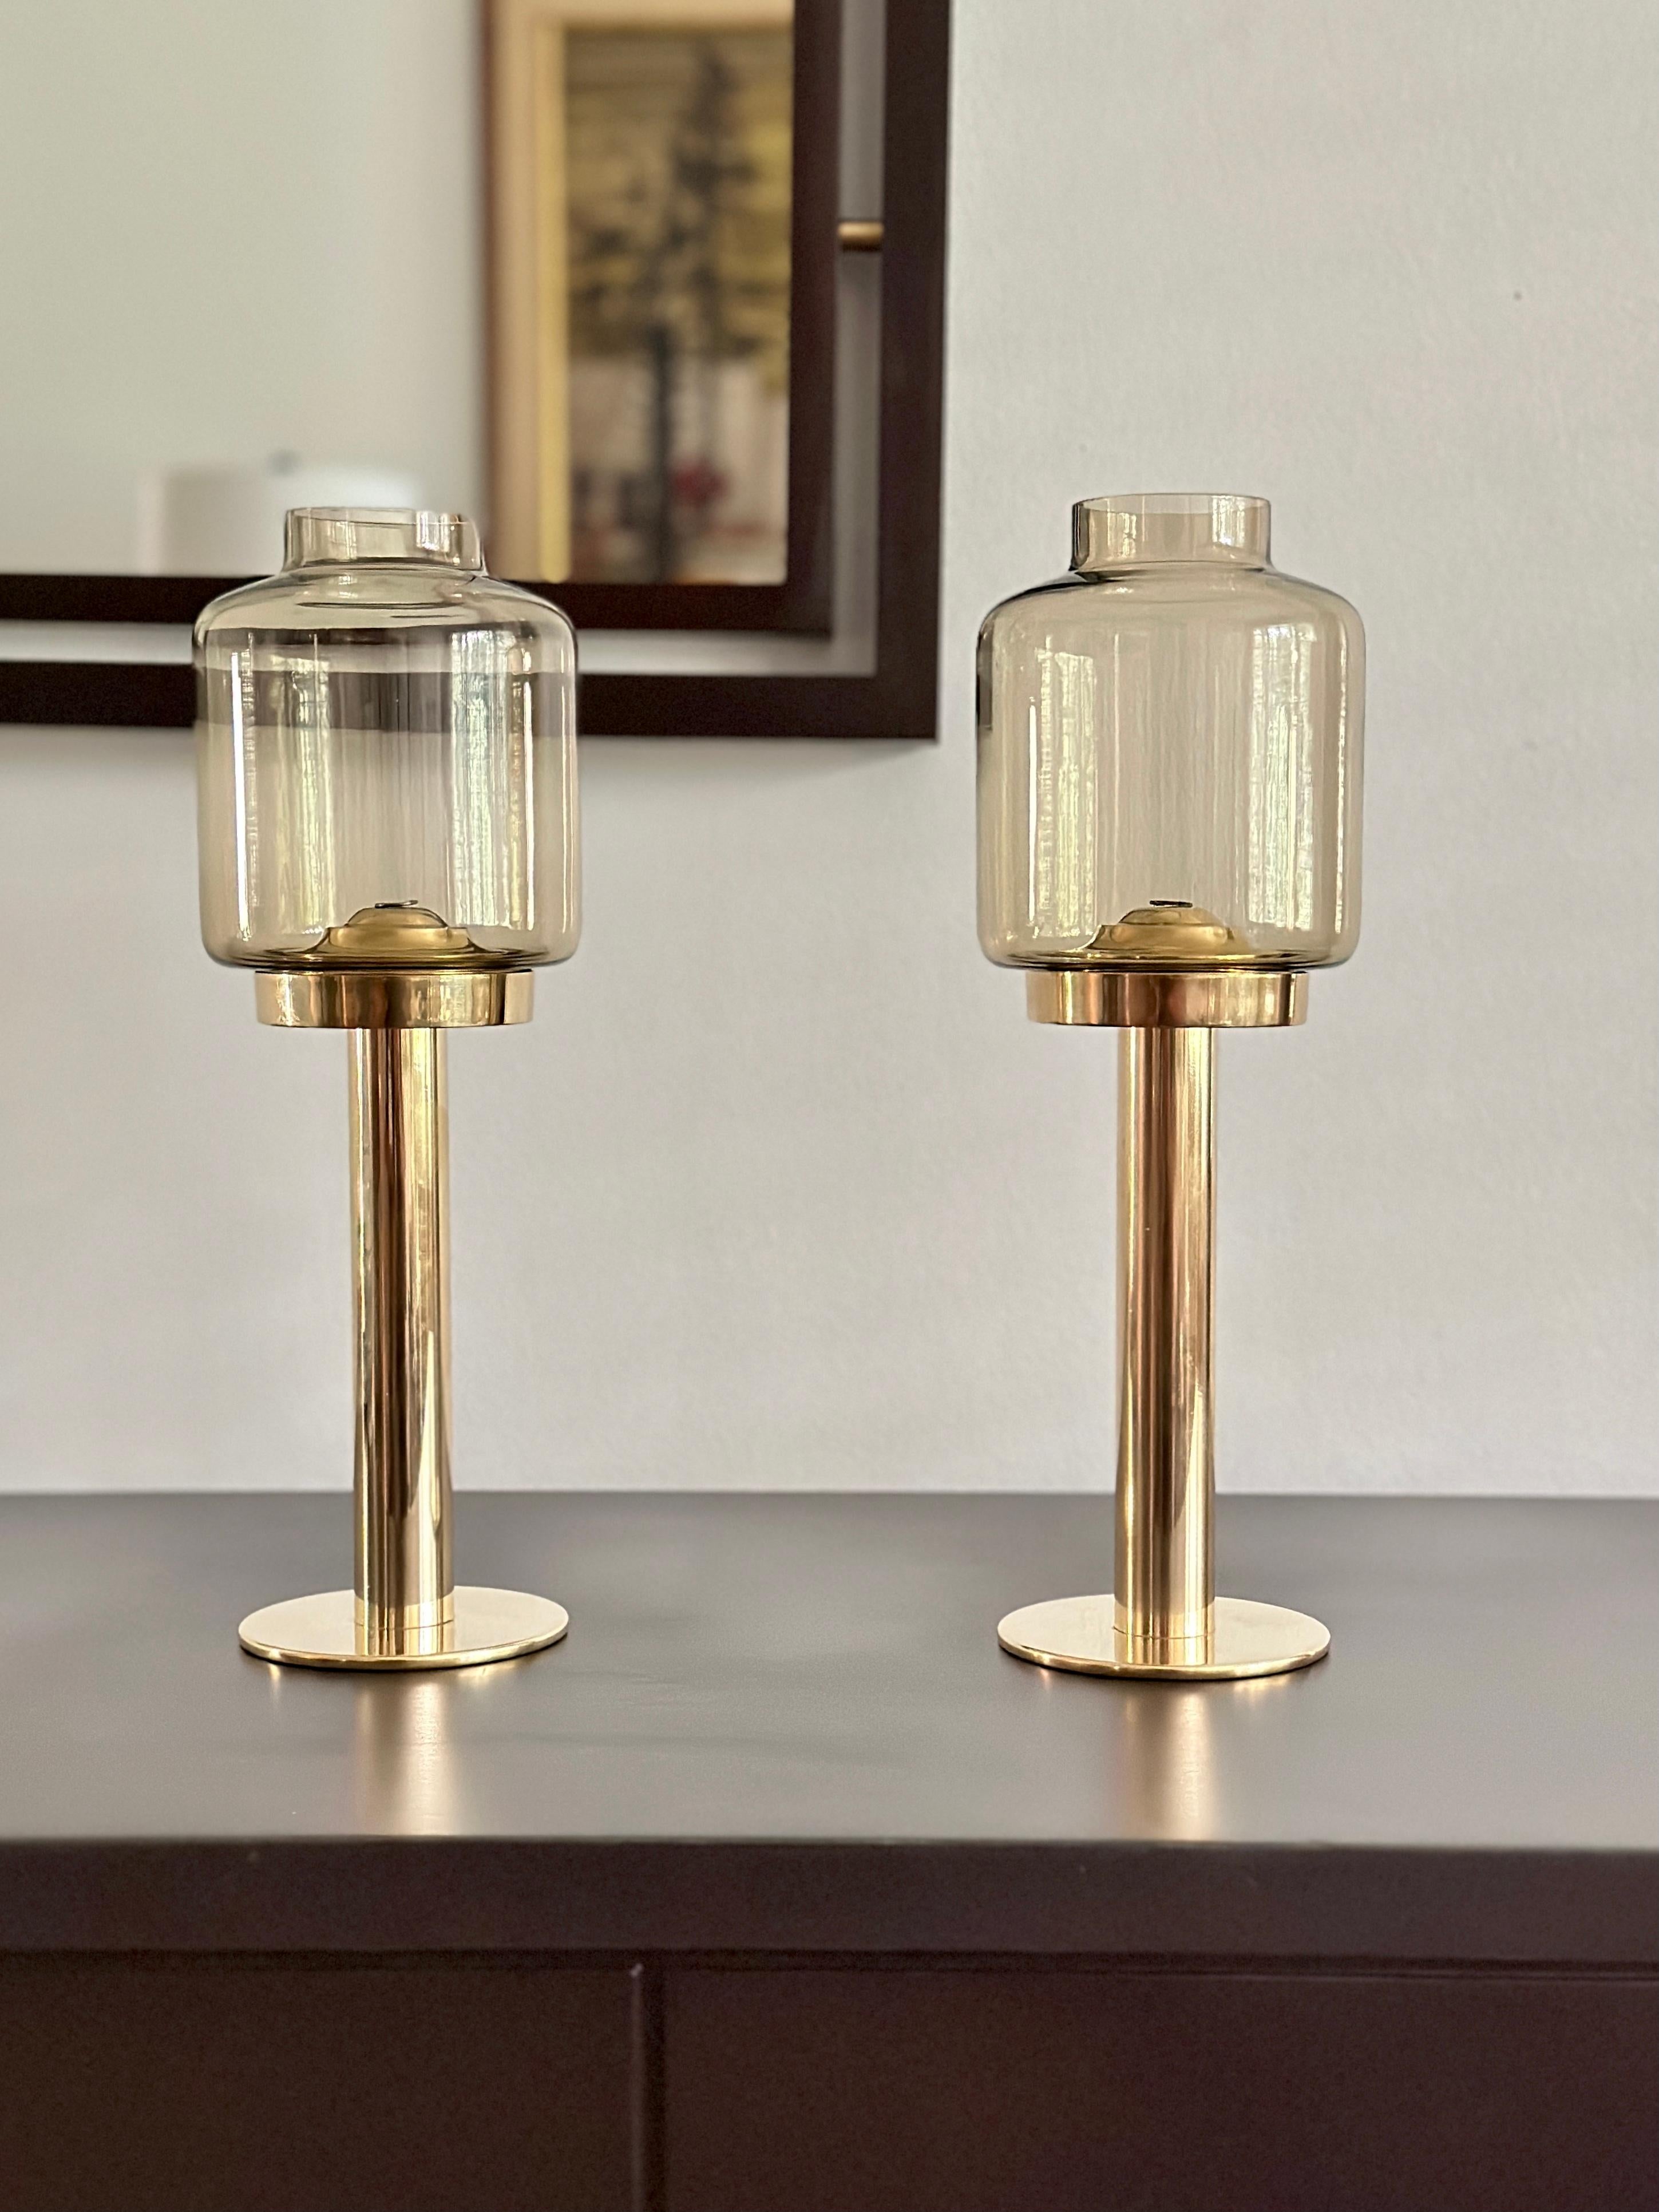 DESCRIPTION

A pair of candlesticks designed by Hans-Agne Jakobsson and produced by his own company, Hans-Agne Jakobsson AB sometime between 1960 - 1970. The candlesticks are solid brass with amber glass globes. The candlesticks have a mechanism